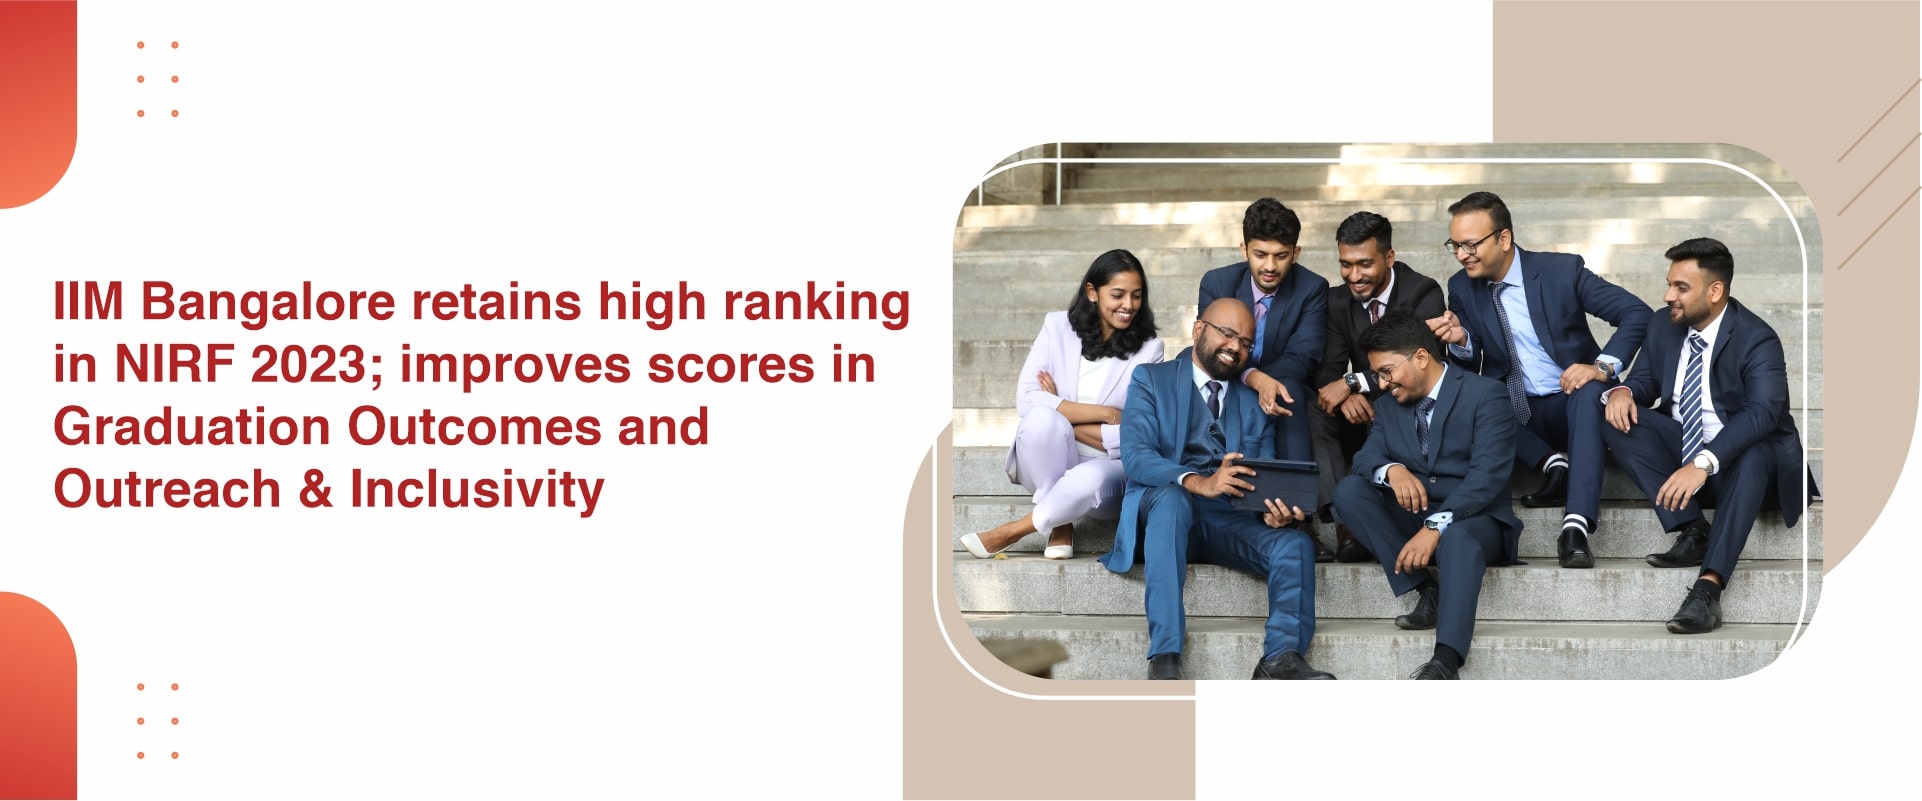 IIMB retains top slot in Positive Impact Rating 2023; achieves big win in Overall score